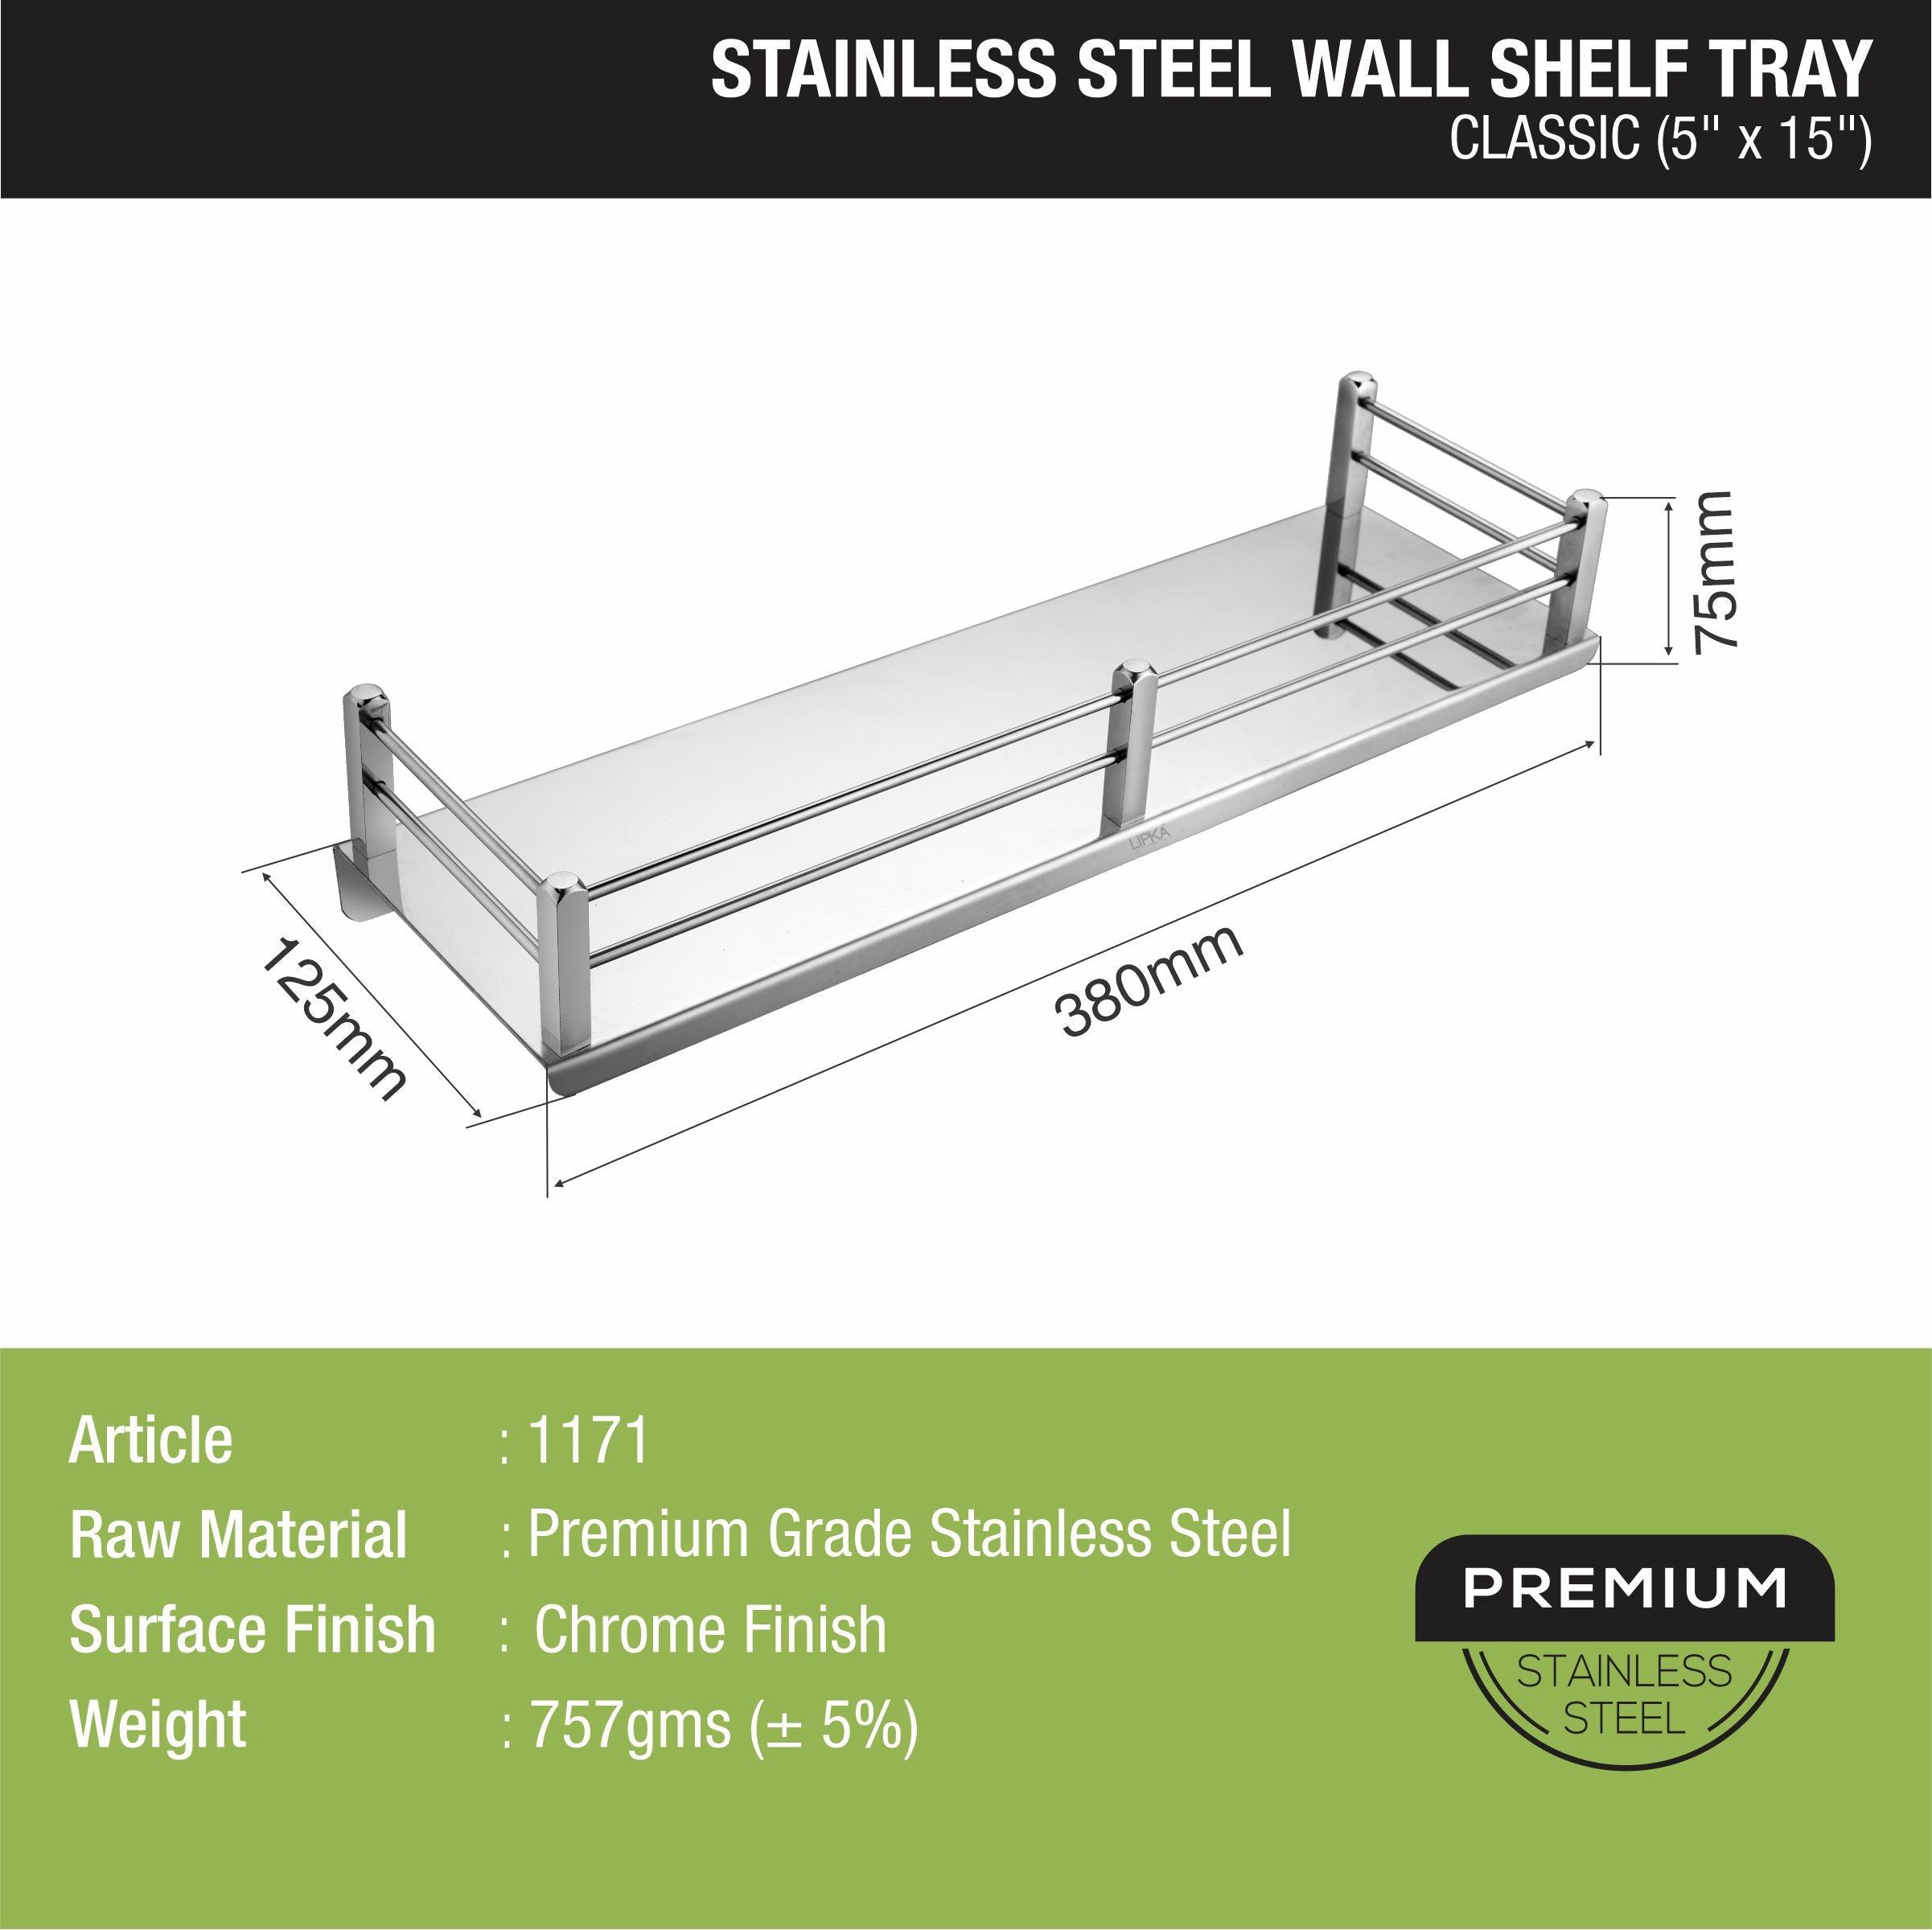 Classic Wall Shelf Tray (5 x 15 Inches) size and dimension